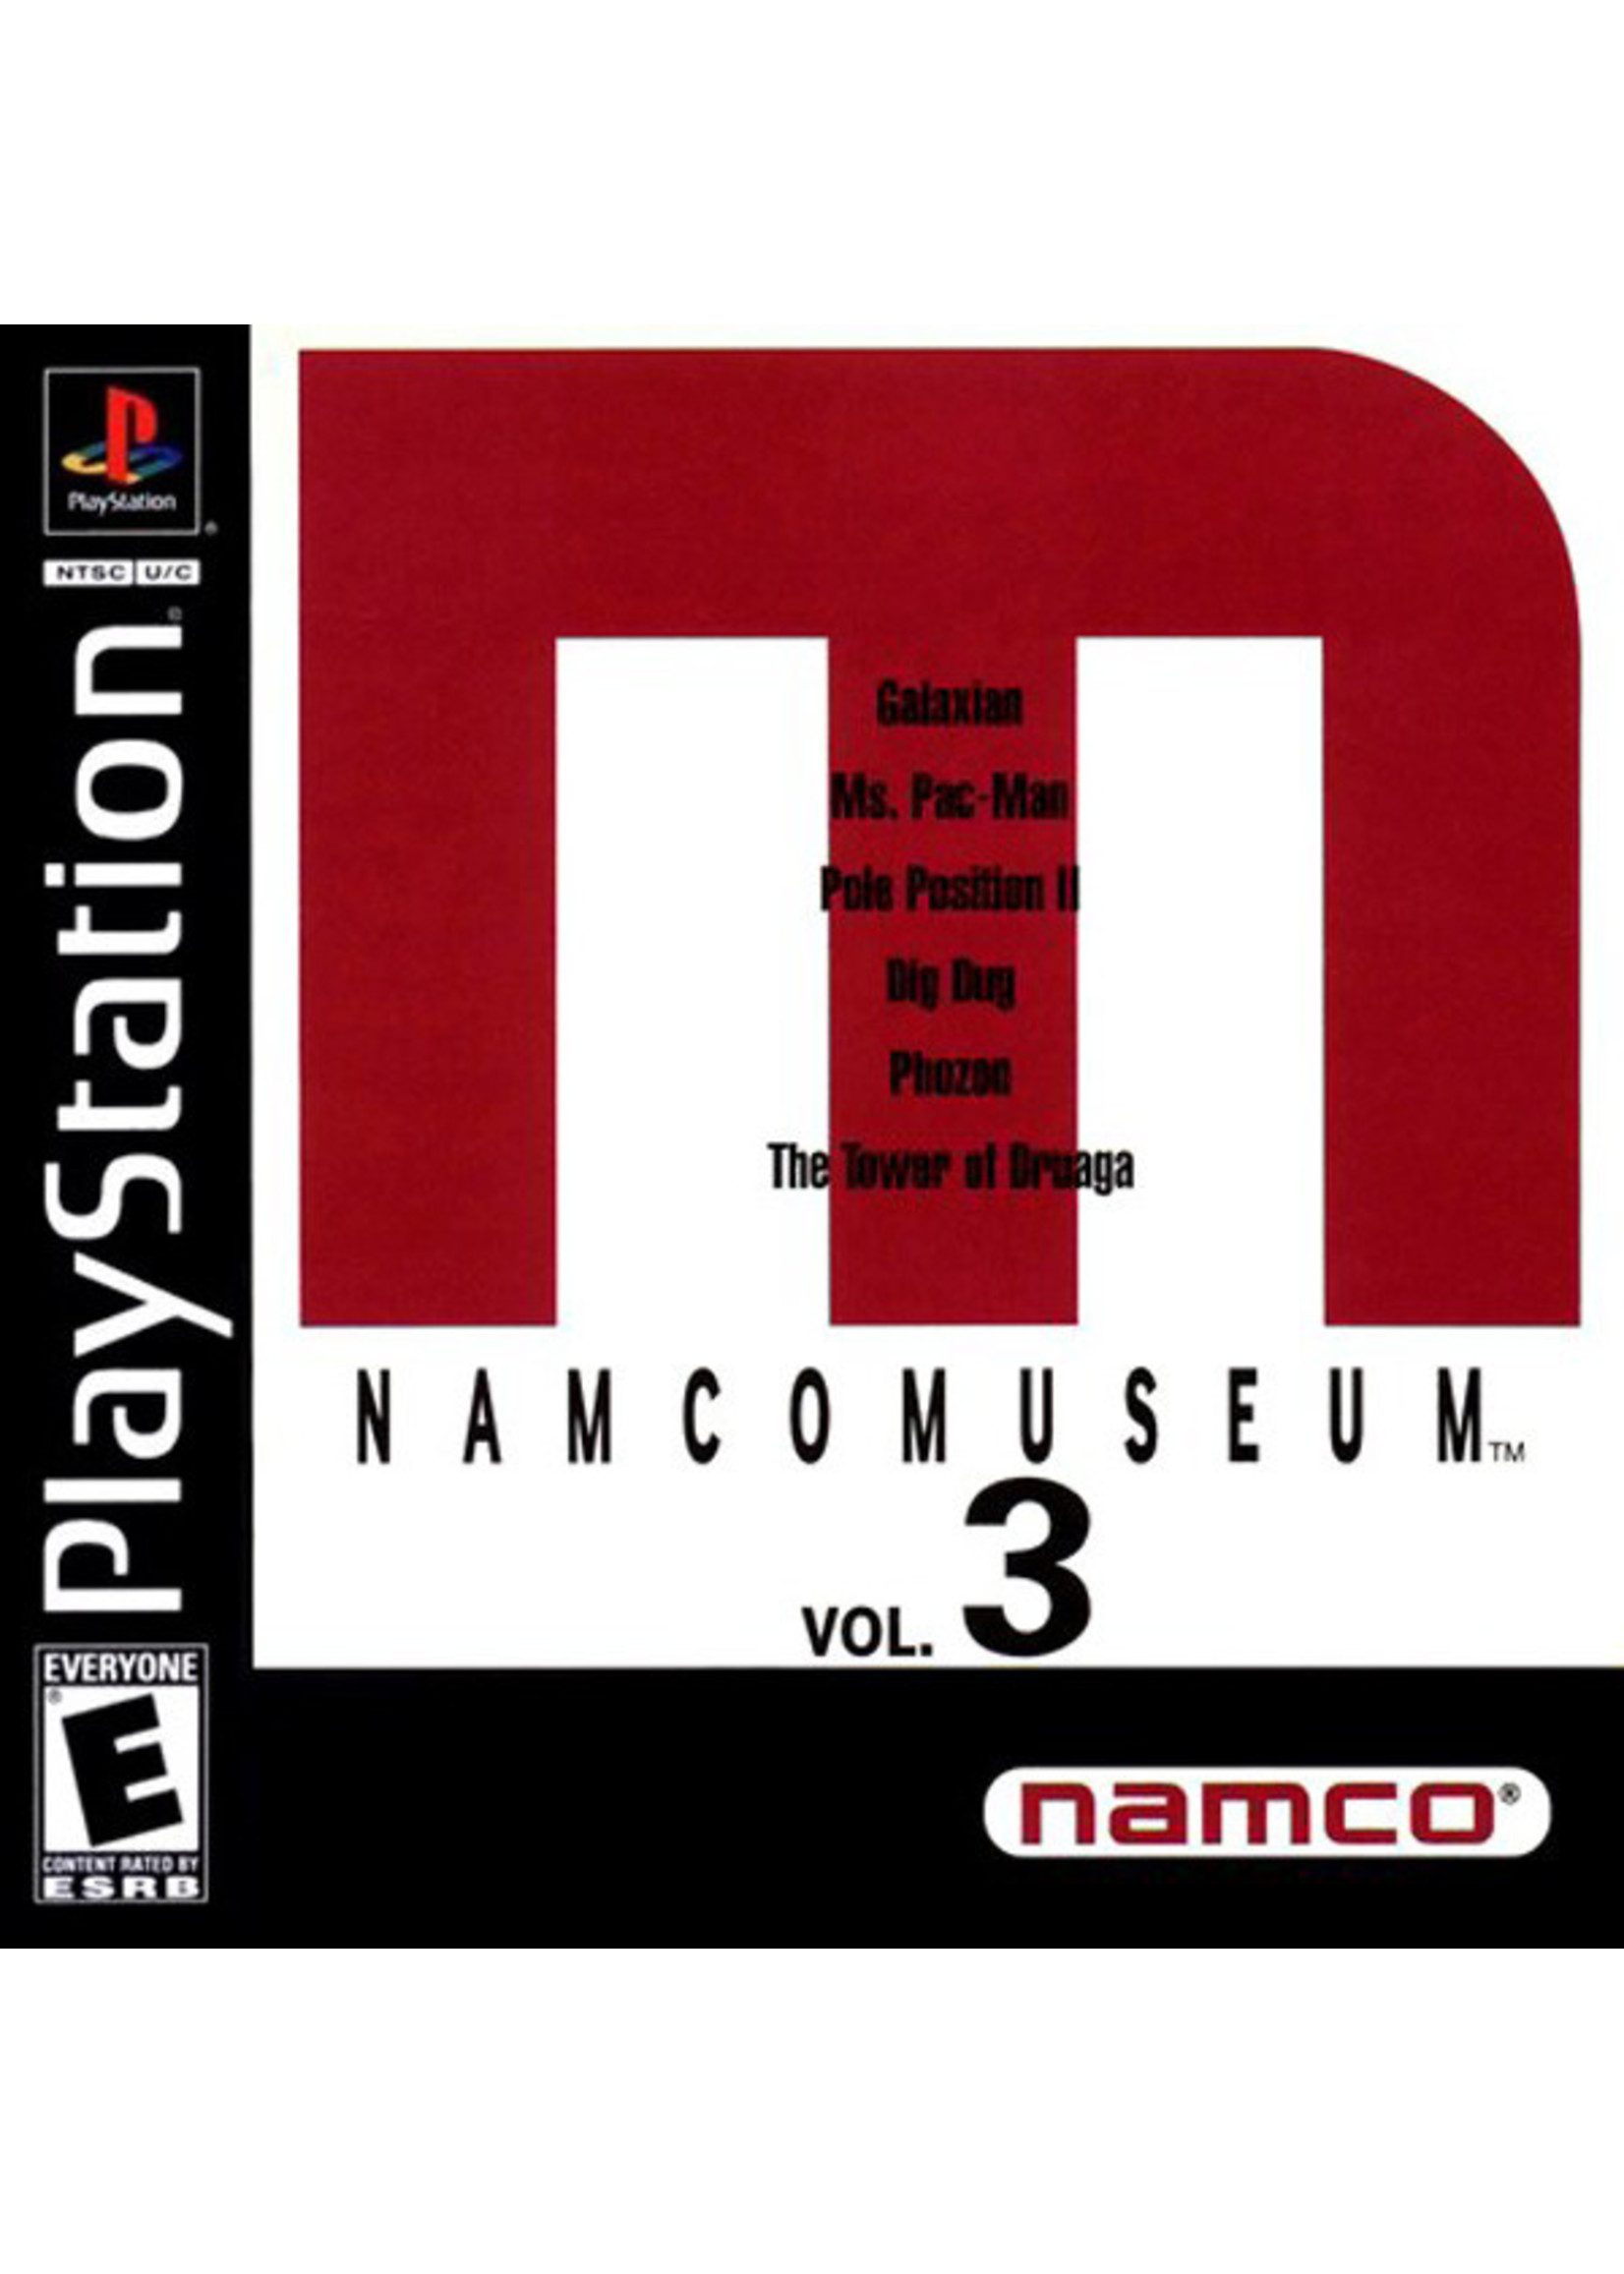 Sony Playstation 1 (PS1) Namco Museum Volume 3